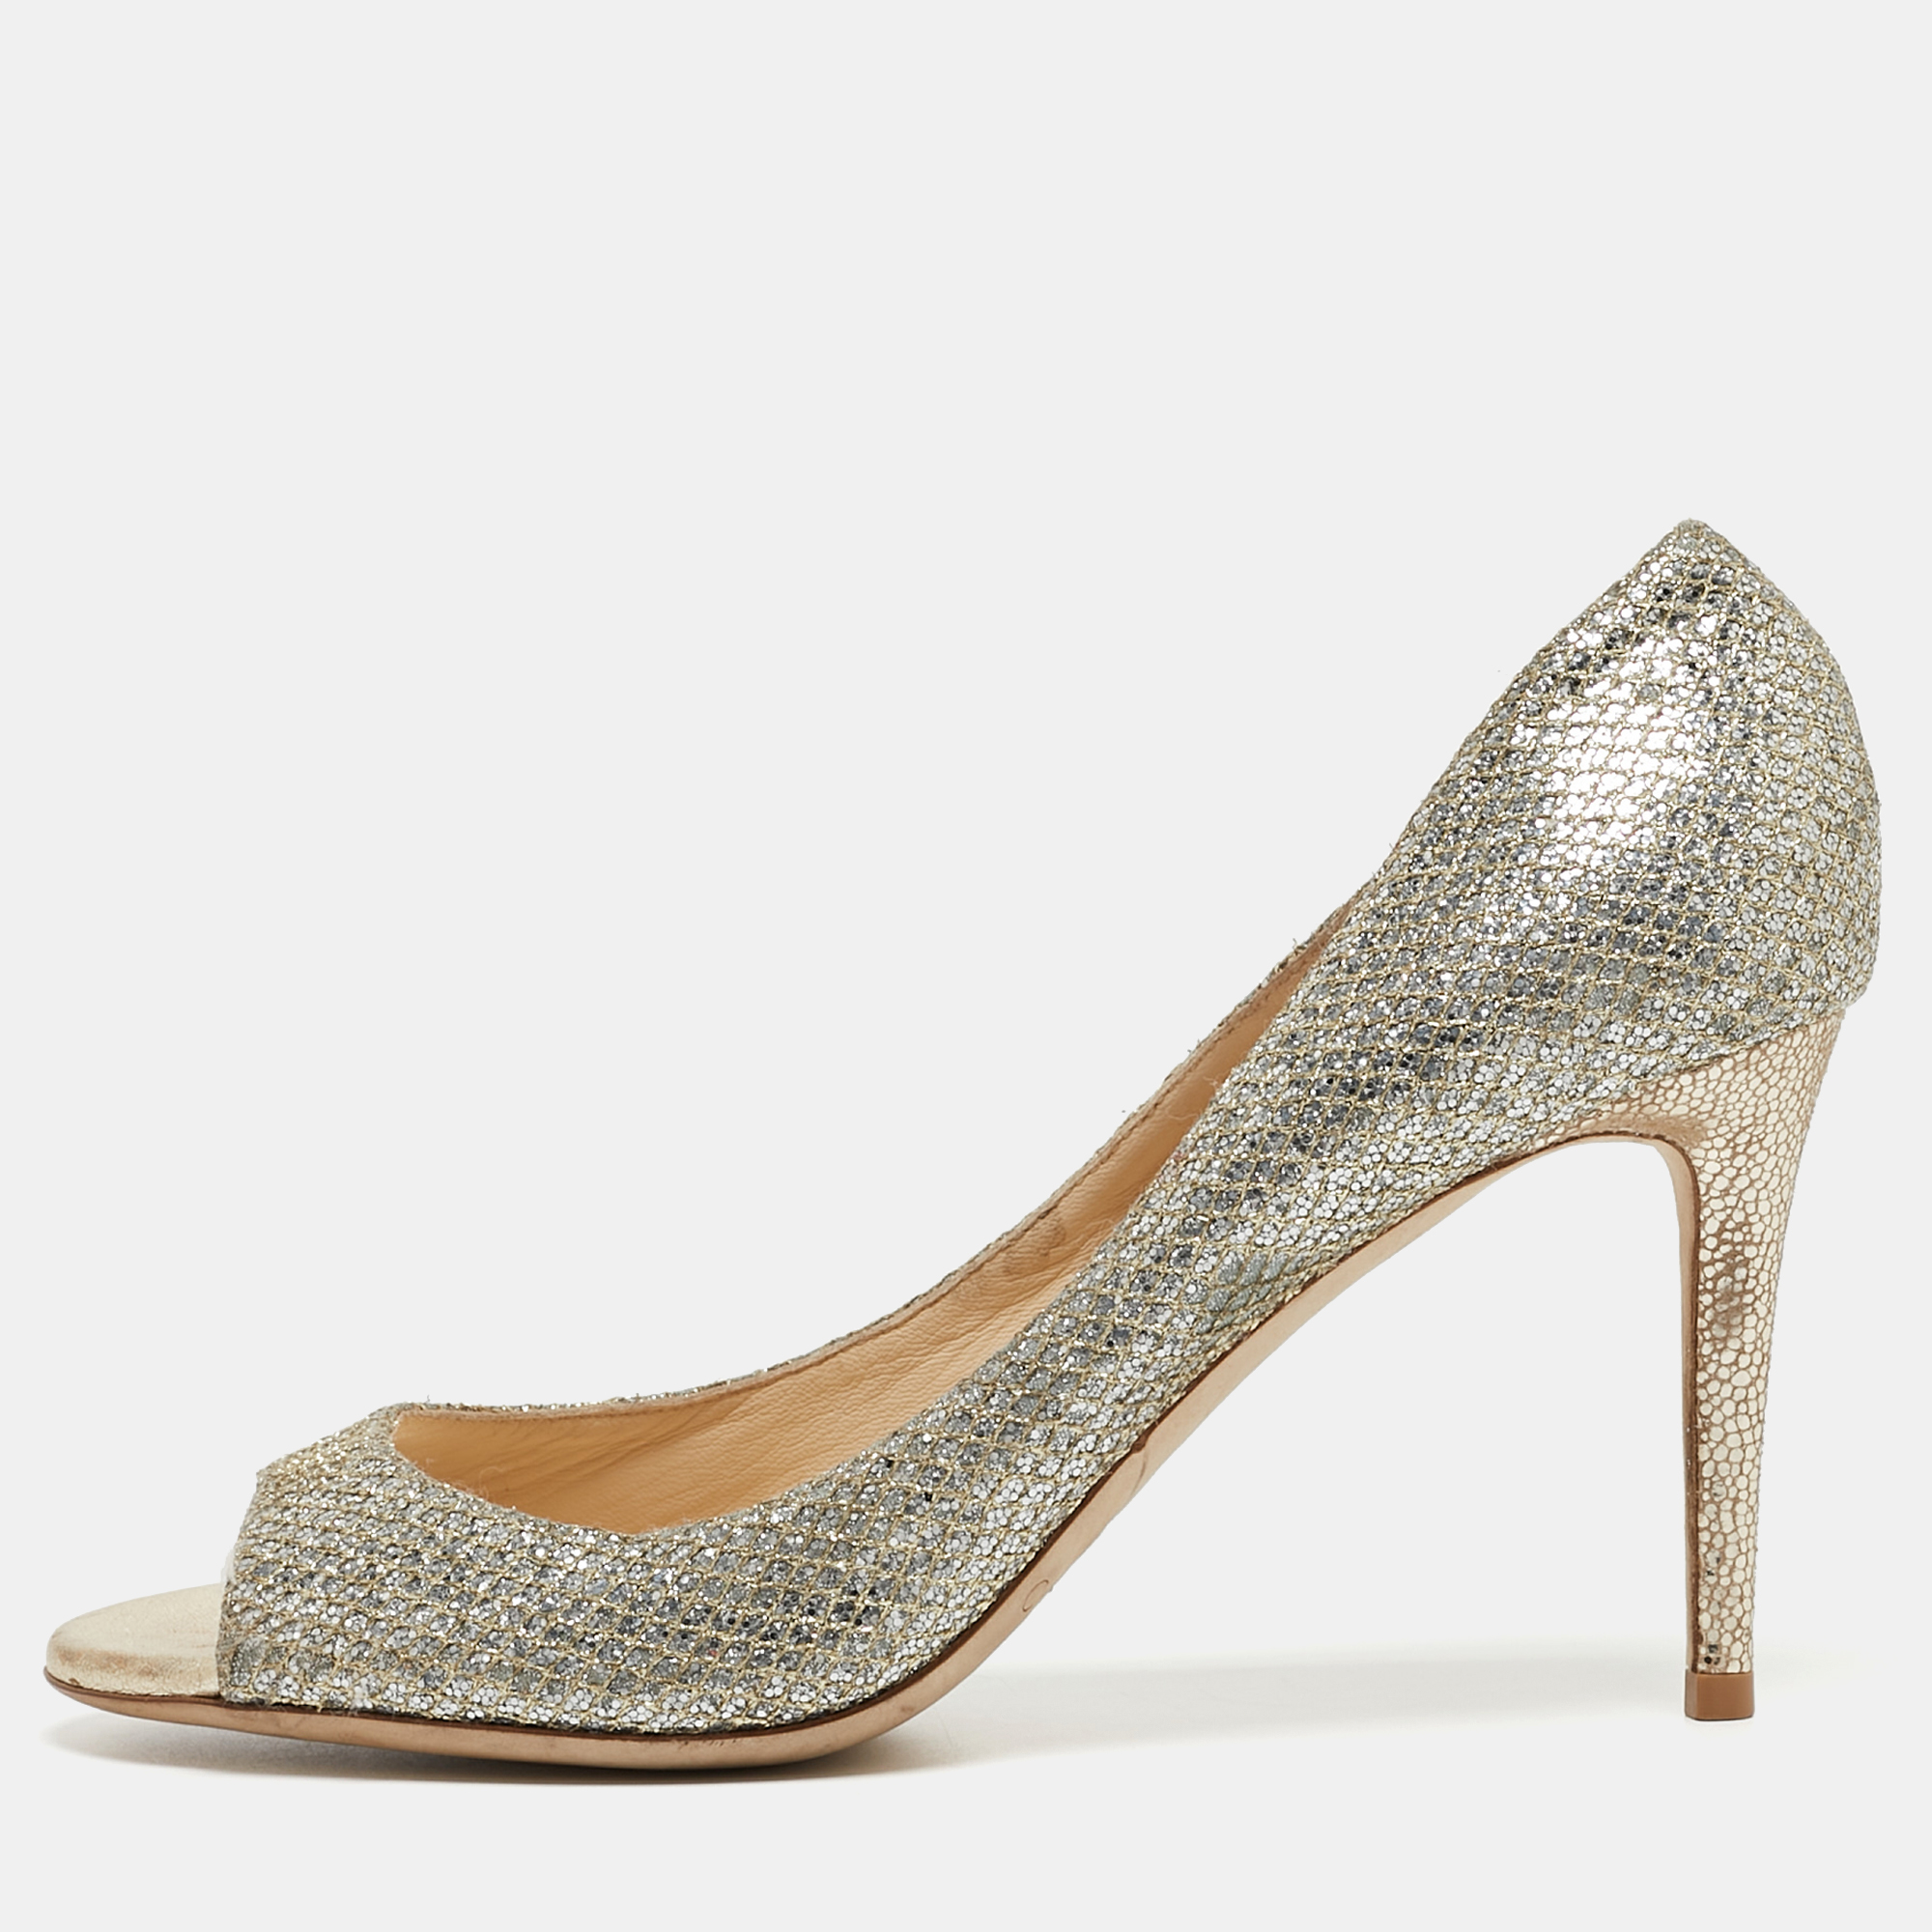 Pre-owned Jimmy Choo Silver/gold Glitter Fabric Evelyn Pumps Size 39.5